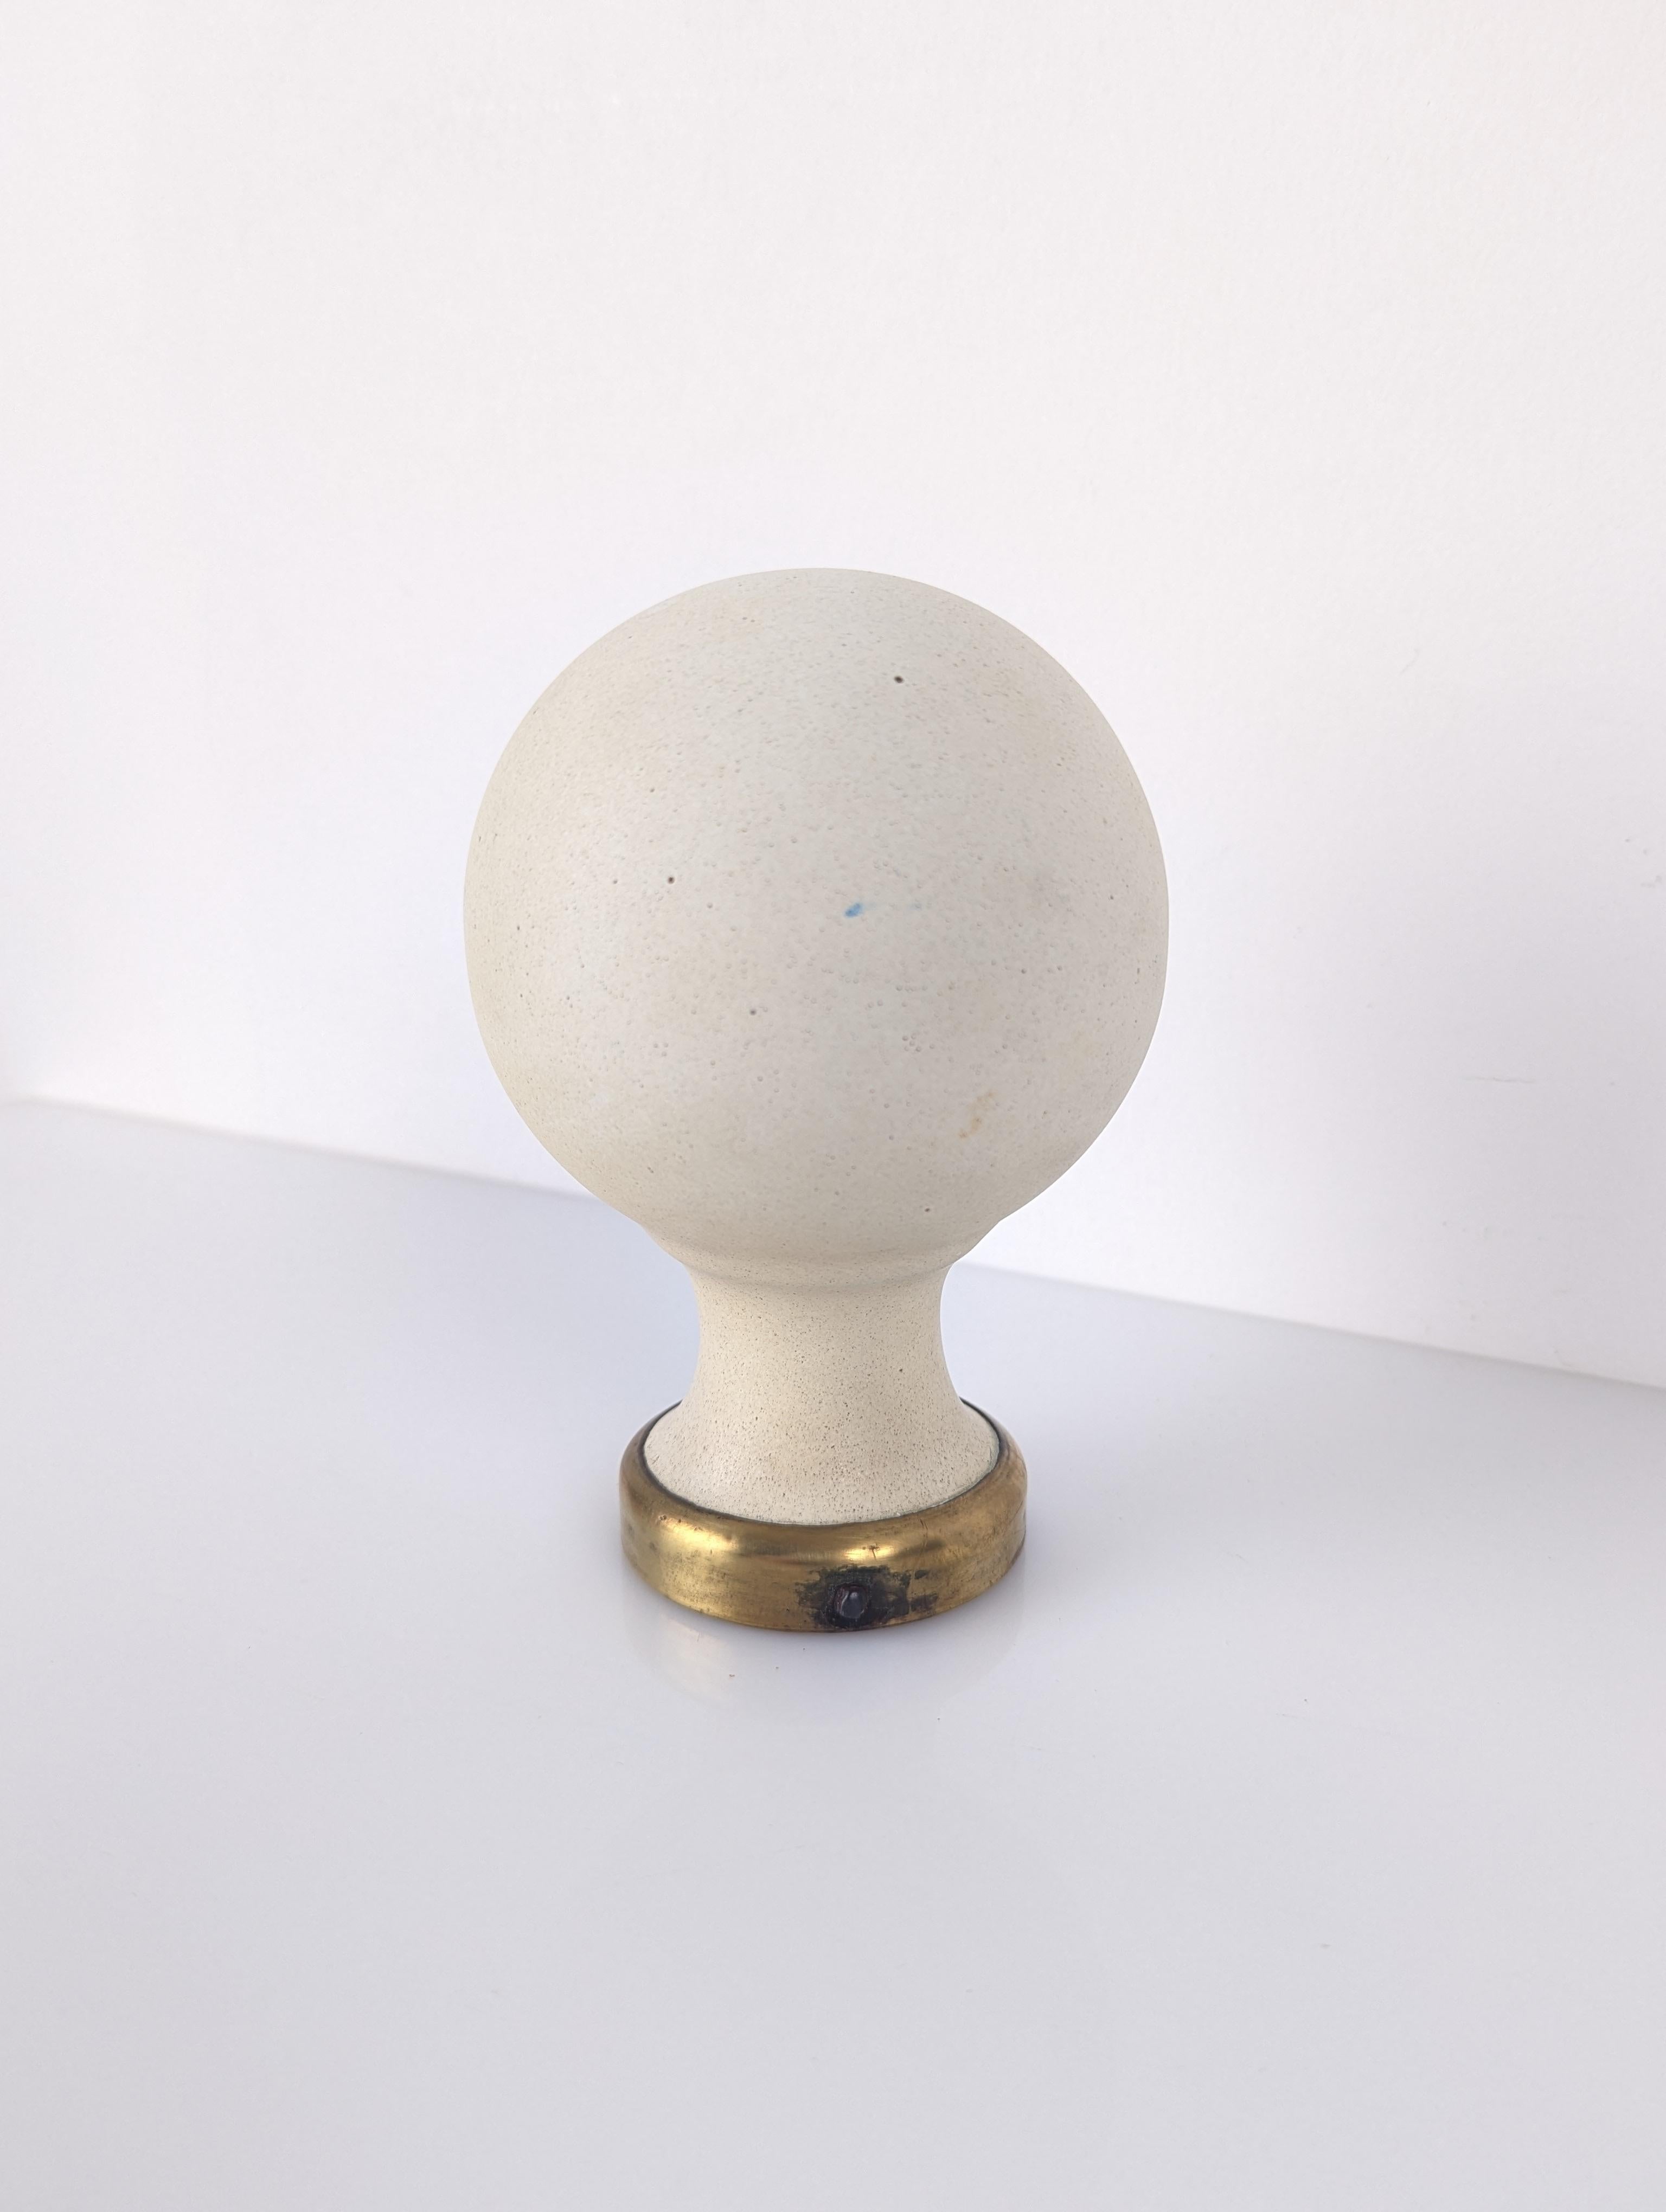 Elegant white ceramic staircase top ball with brass base.